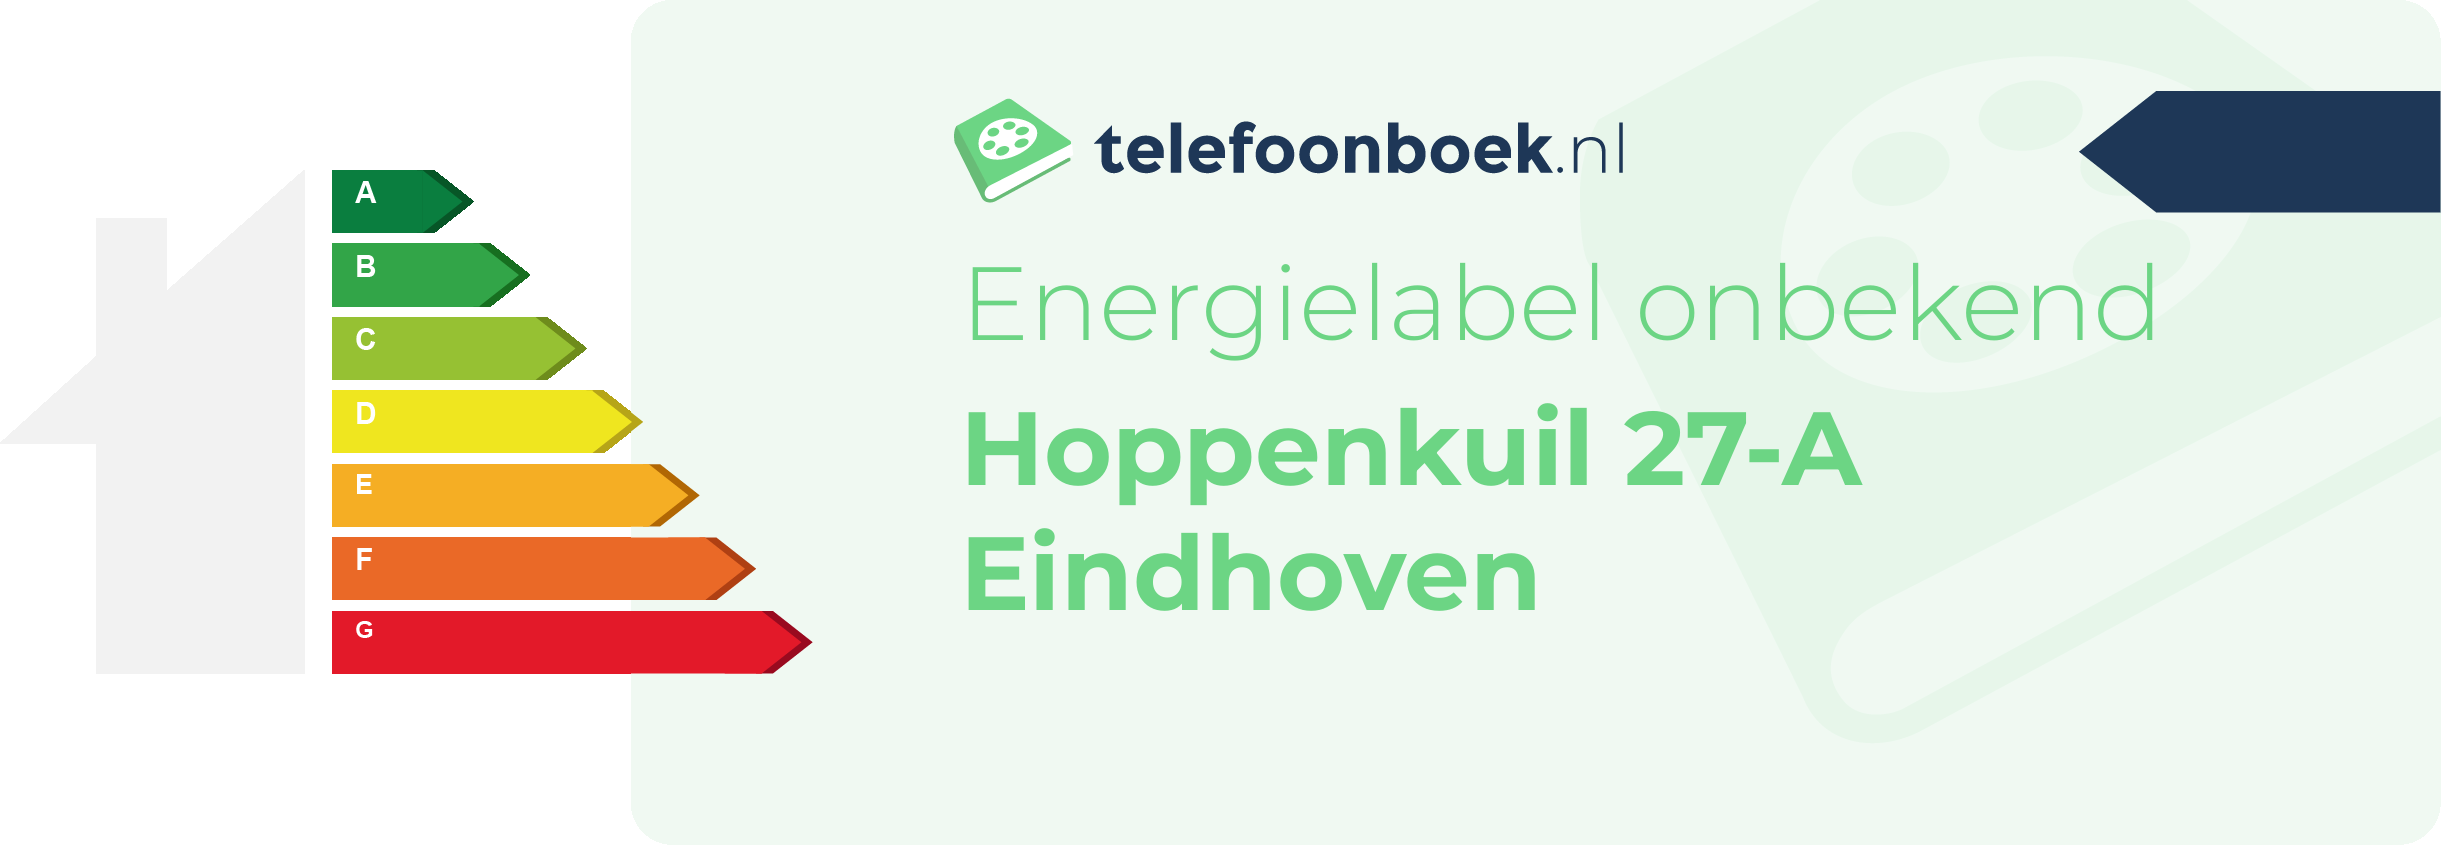 Energielabel Hoppenkuil 27-A Eindhoven